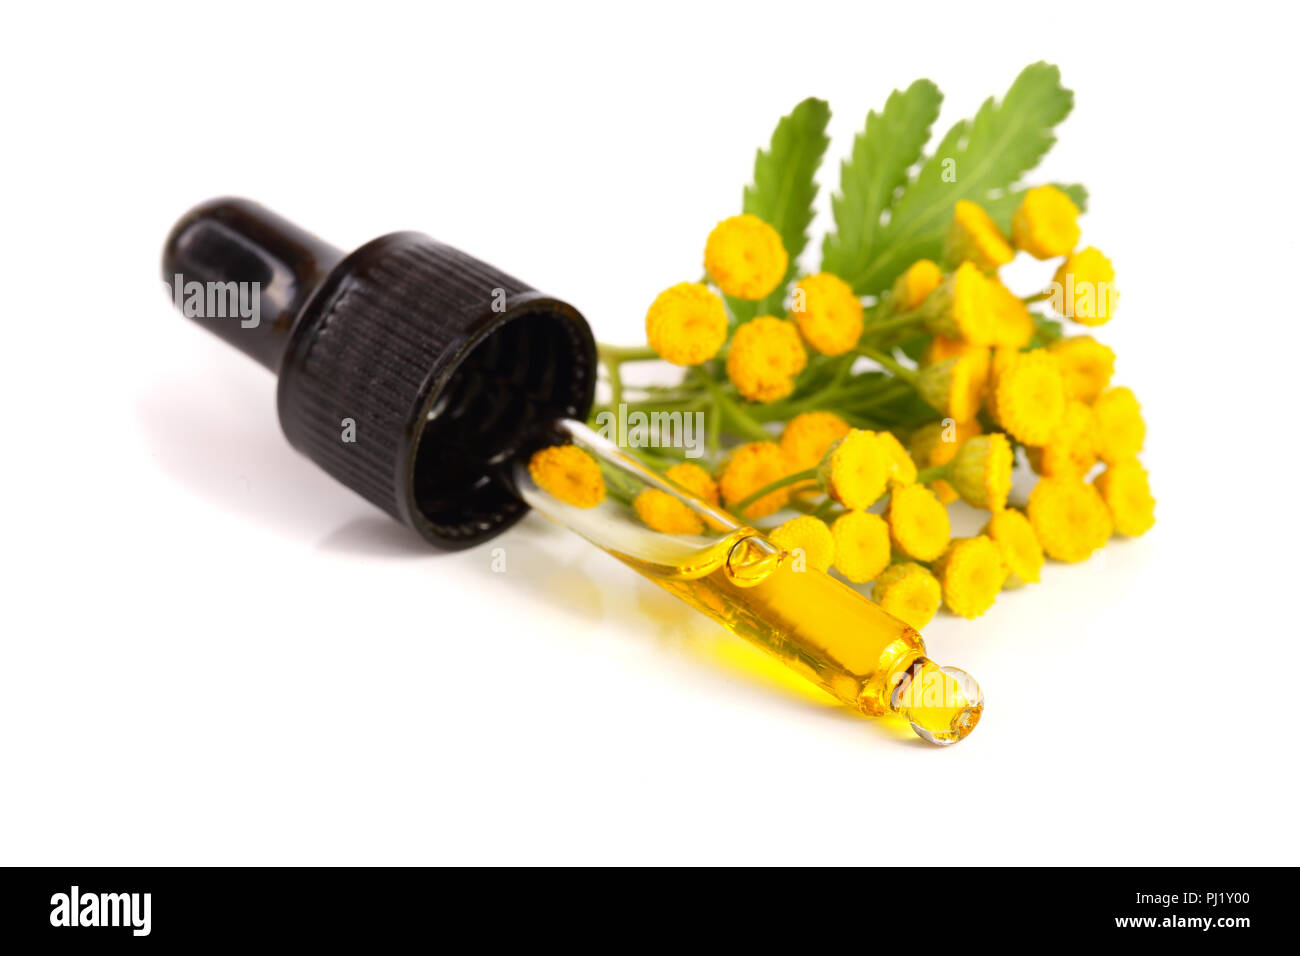 essential tansy oil with flowers and leaf isolated on white background. Stock Photo